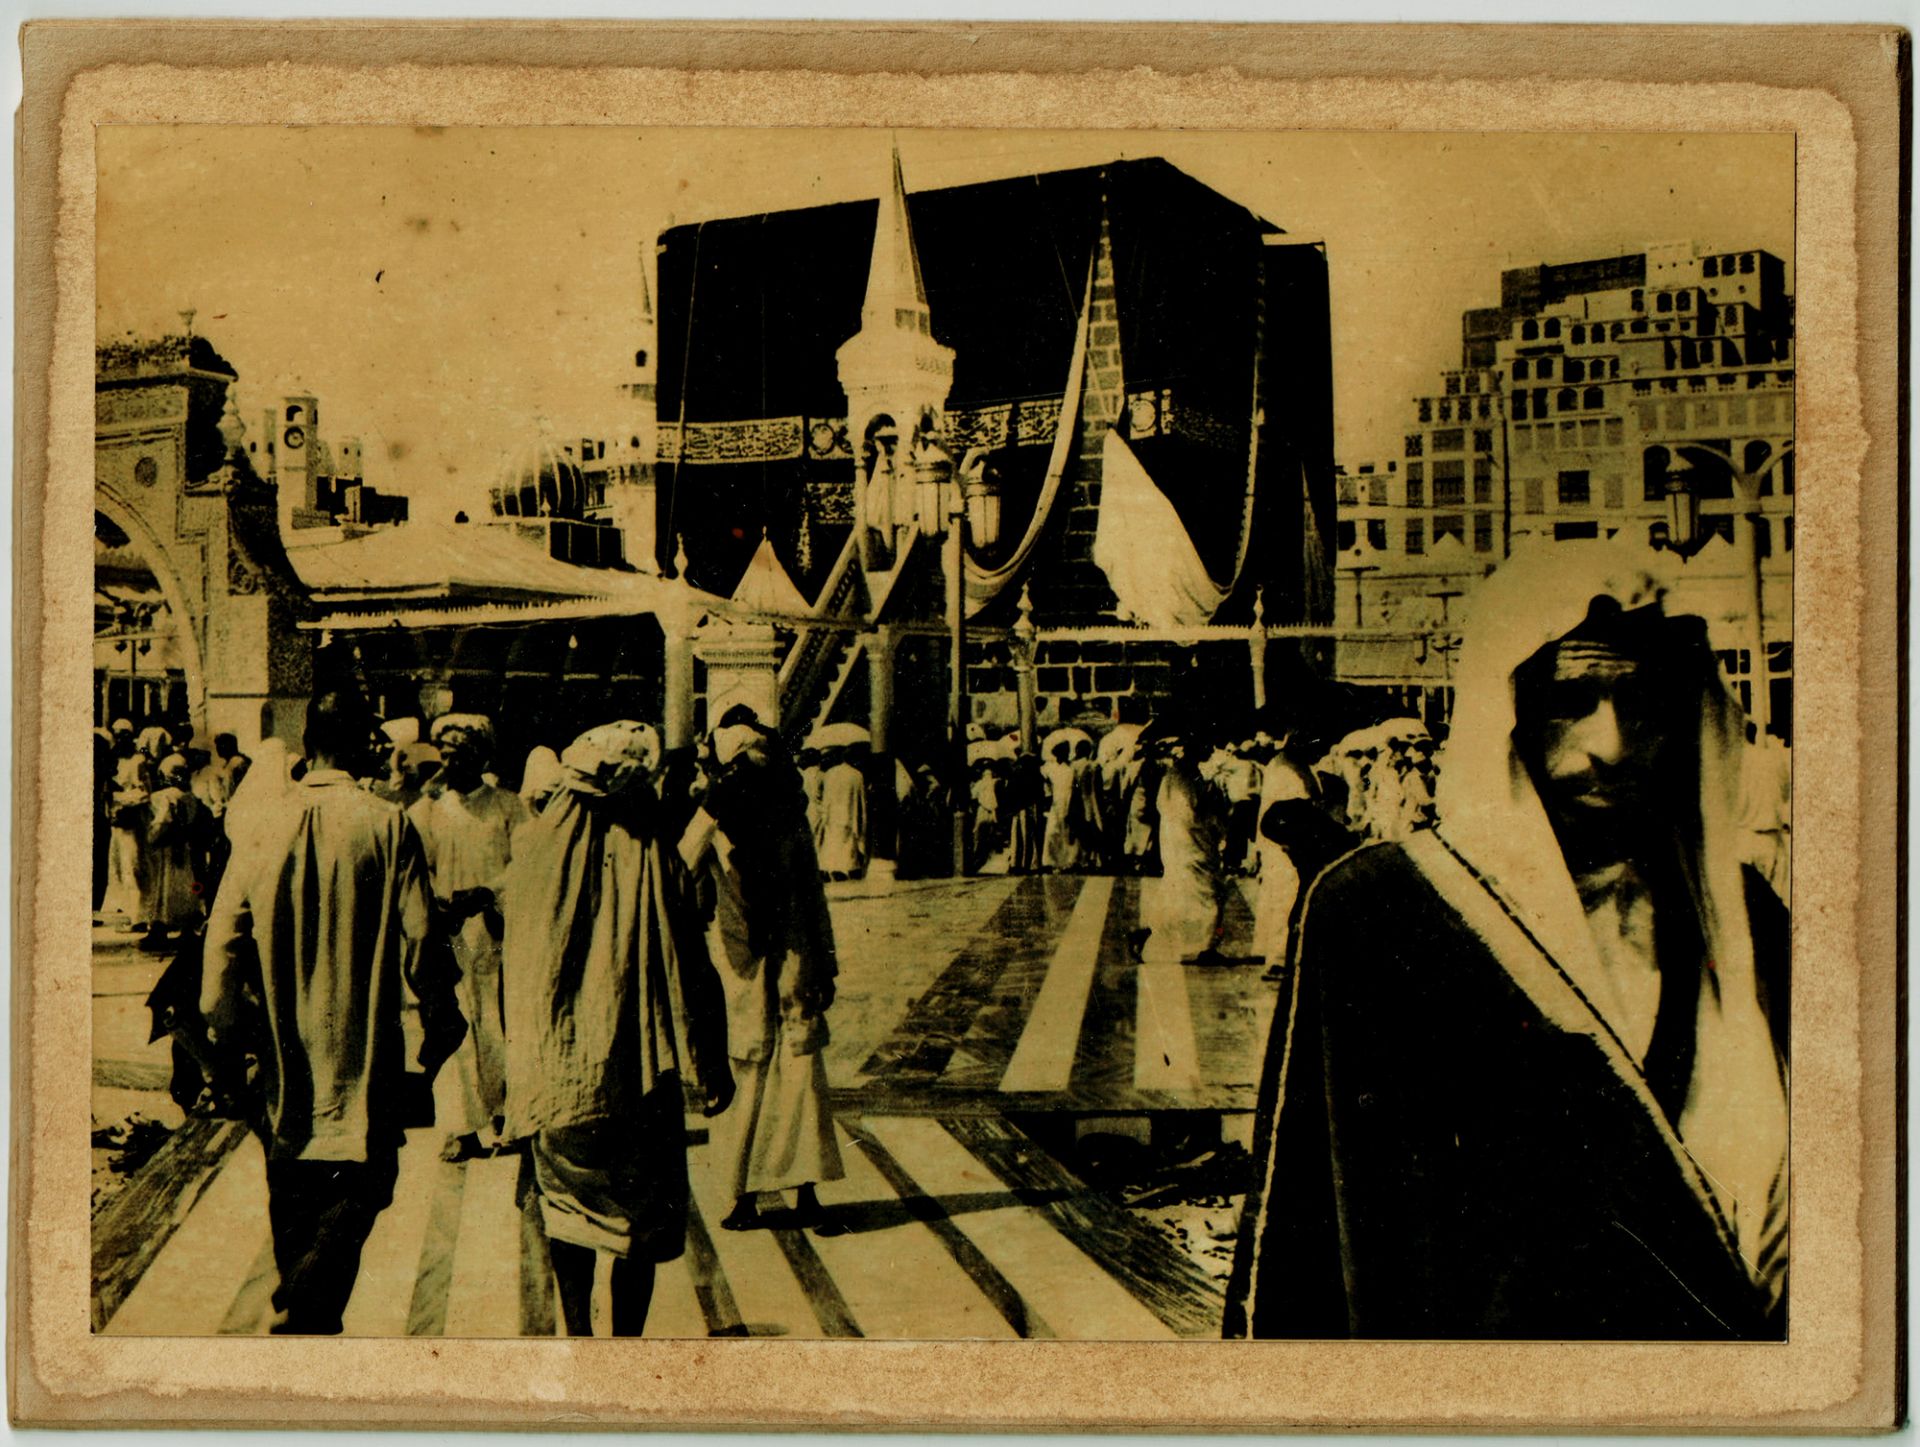 A COLLECTION OF SEVEN OLD PHOTOGRAPHS OF MECCA, MEDINA, THE MAHMAL AND THE HAJJ, EARLY 20TH CENTURY - Image 8 of 8